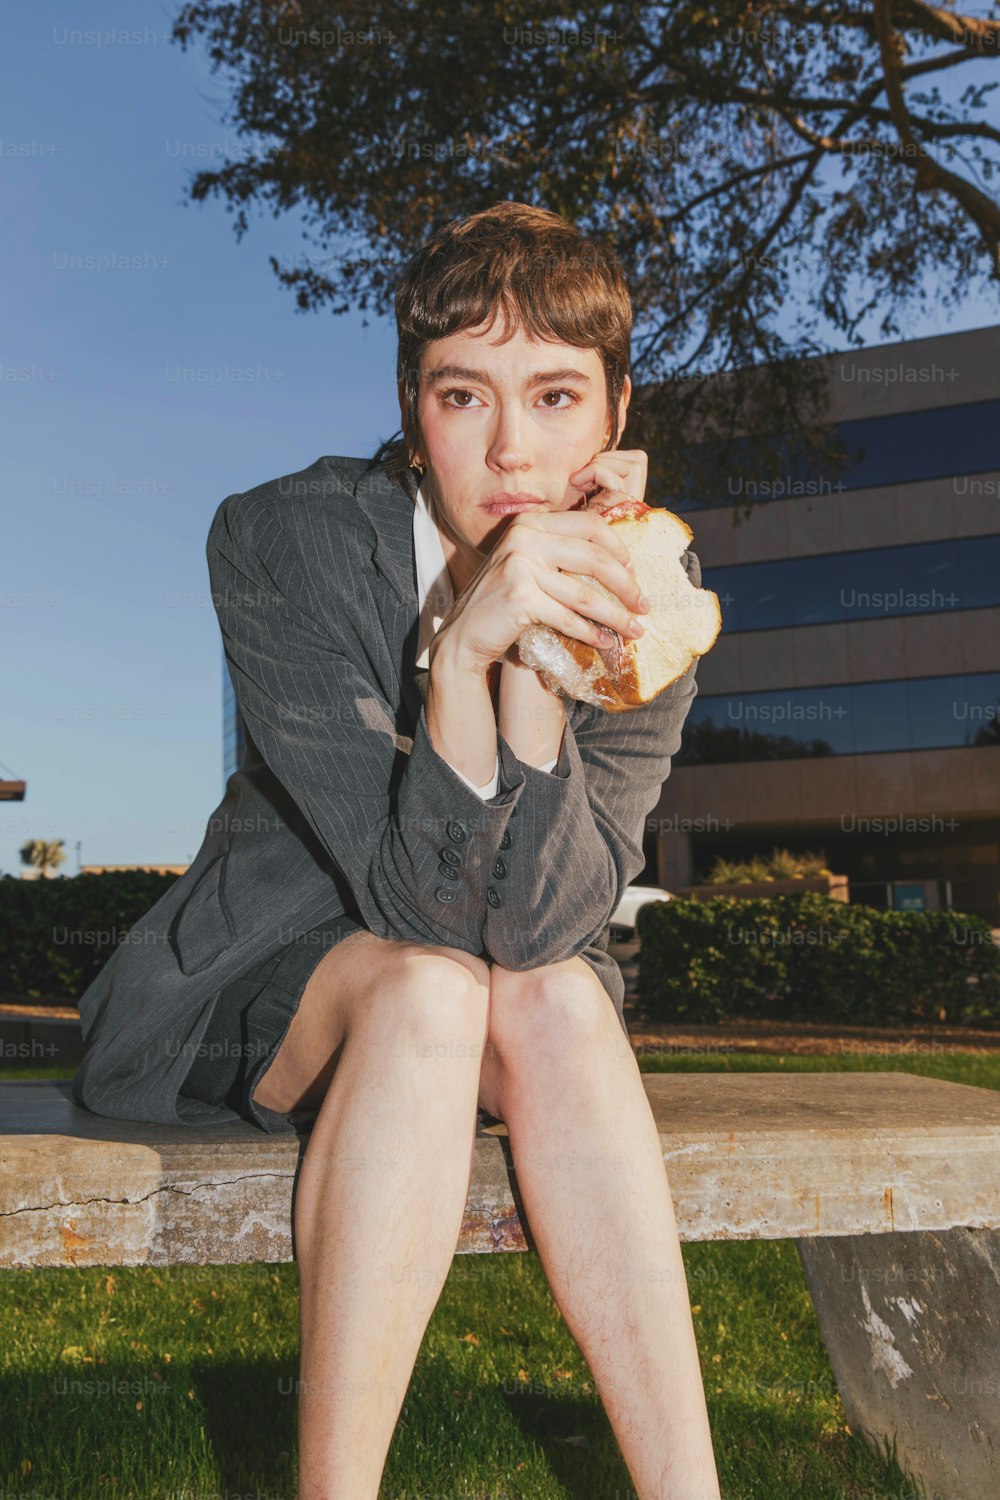 a woman sitting on a bench eating a sandwich